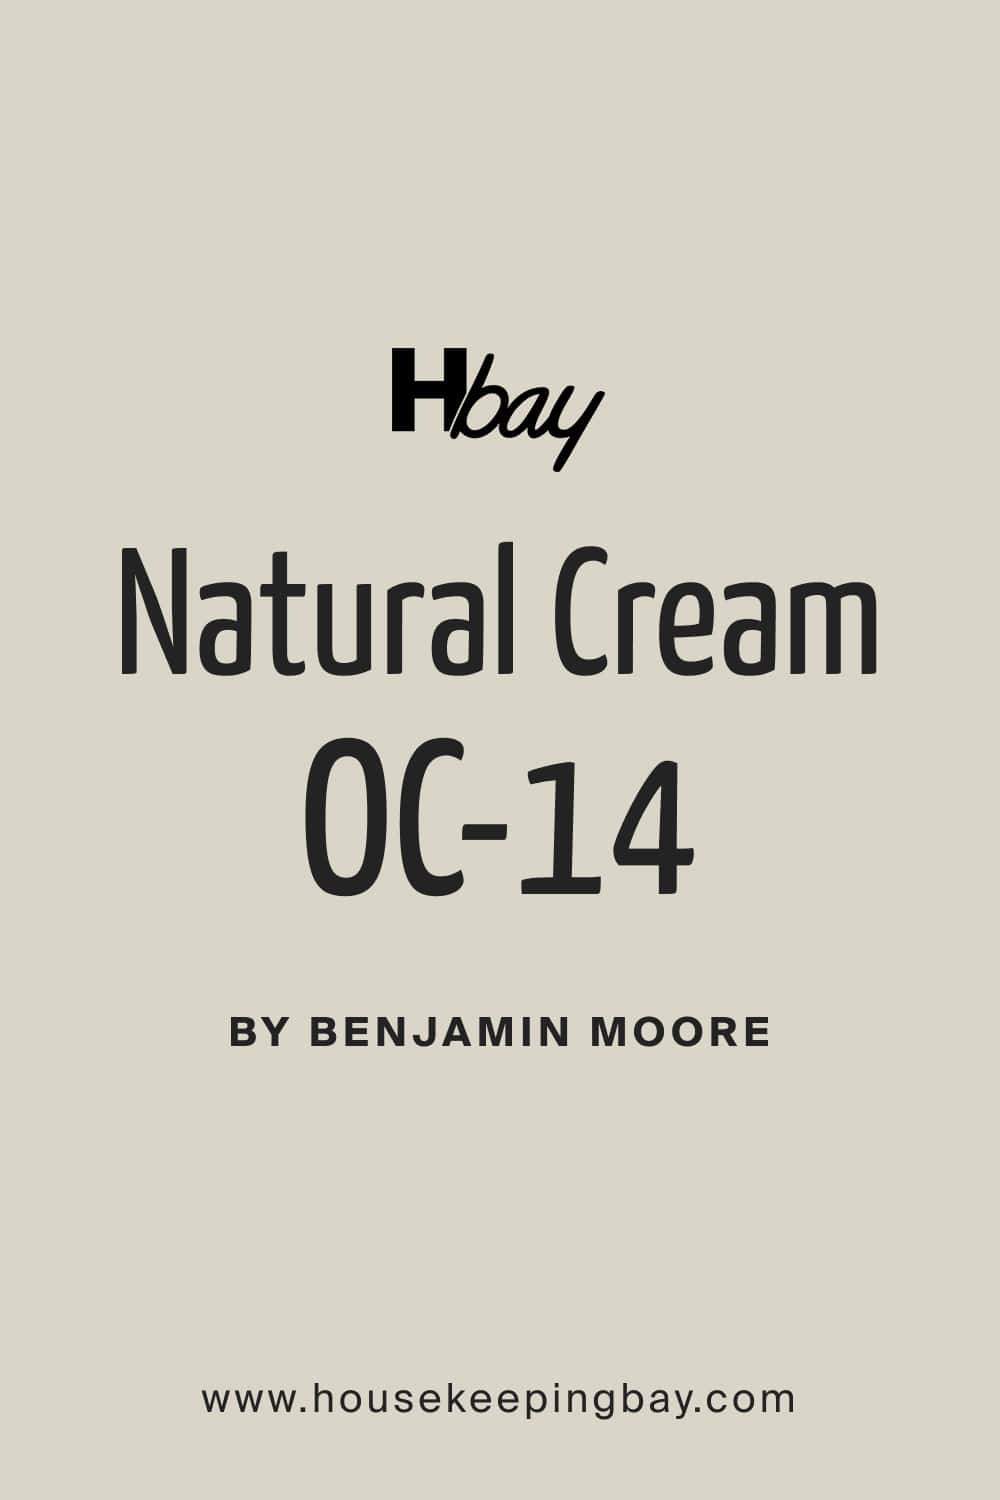 Natural Cream OC 14 by Sherwin Williams